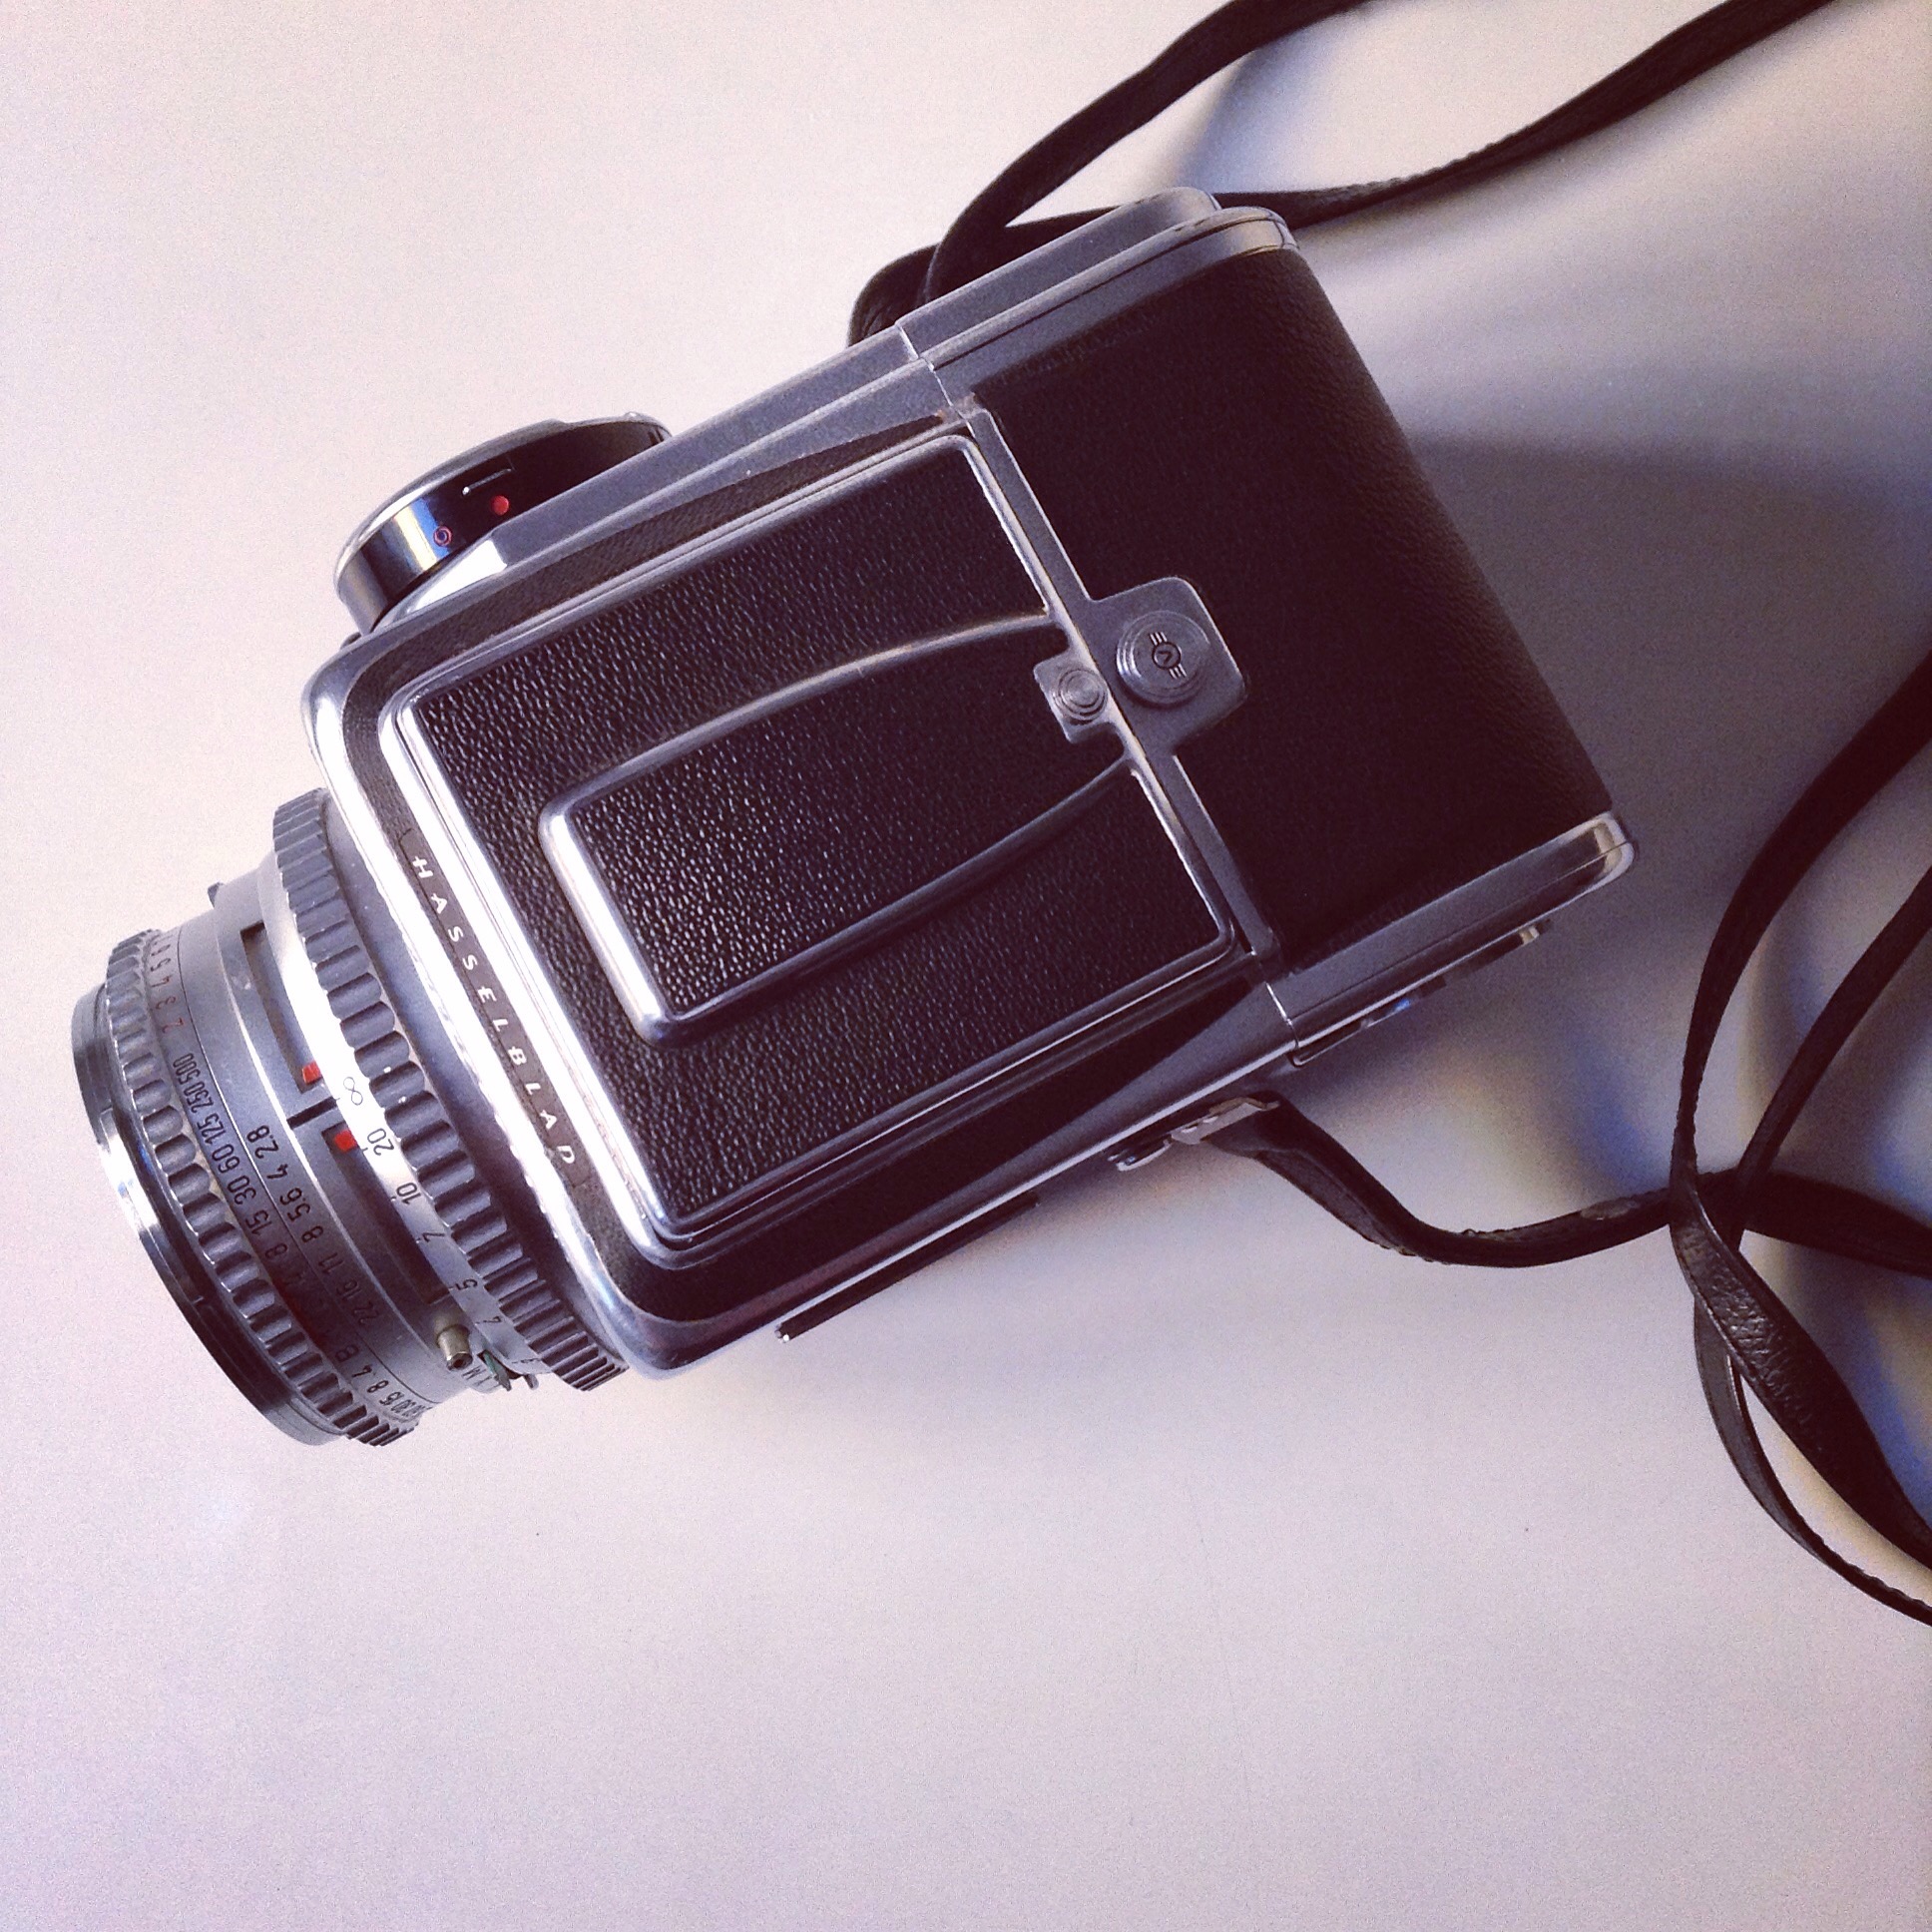 Hi there, Hasselblad